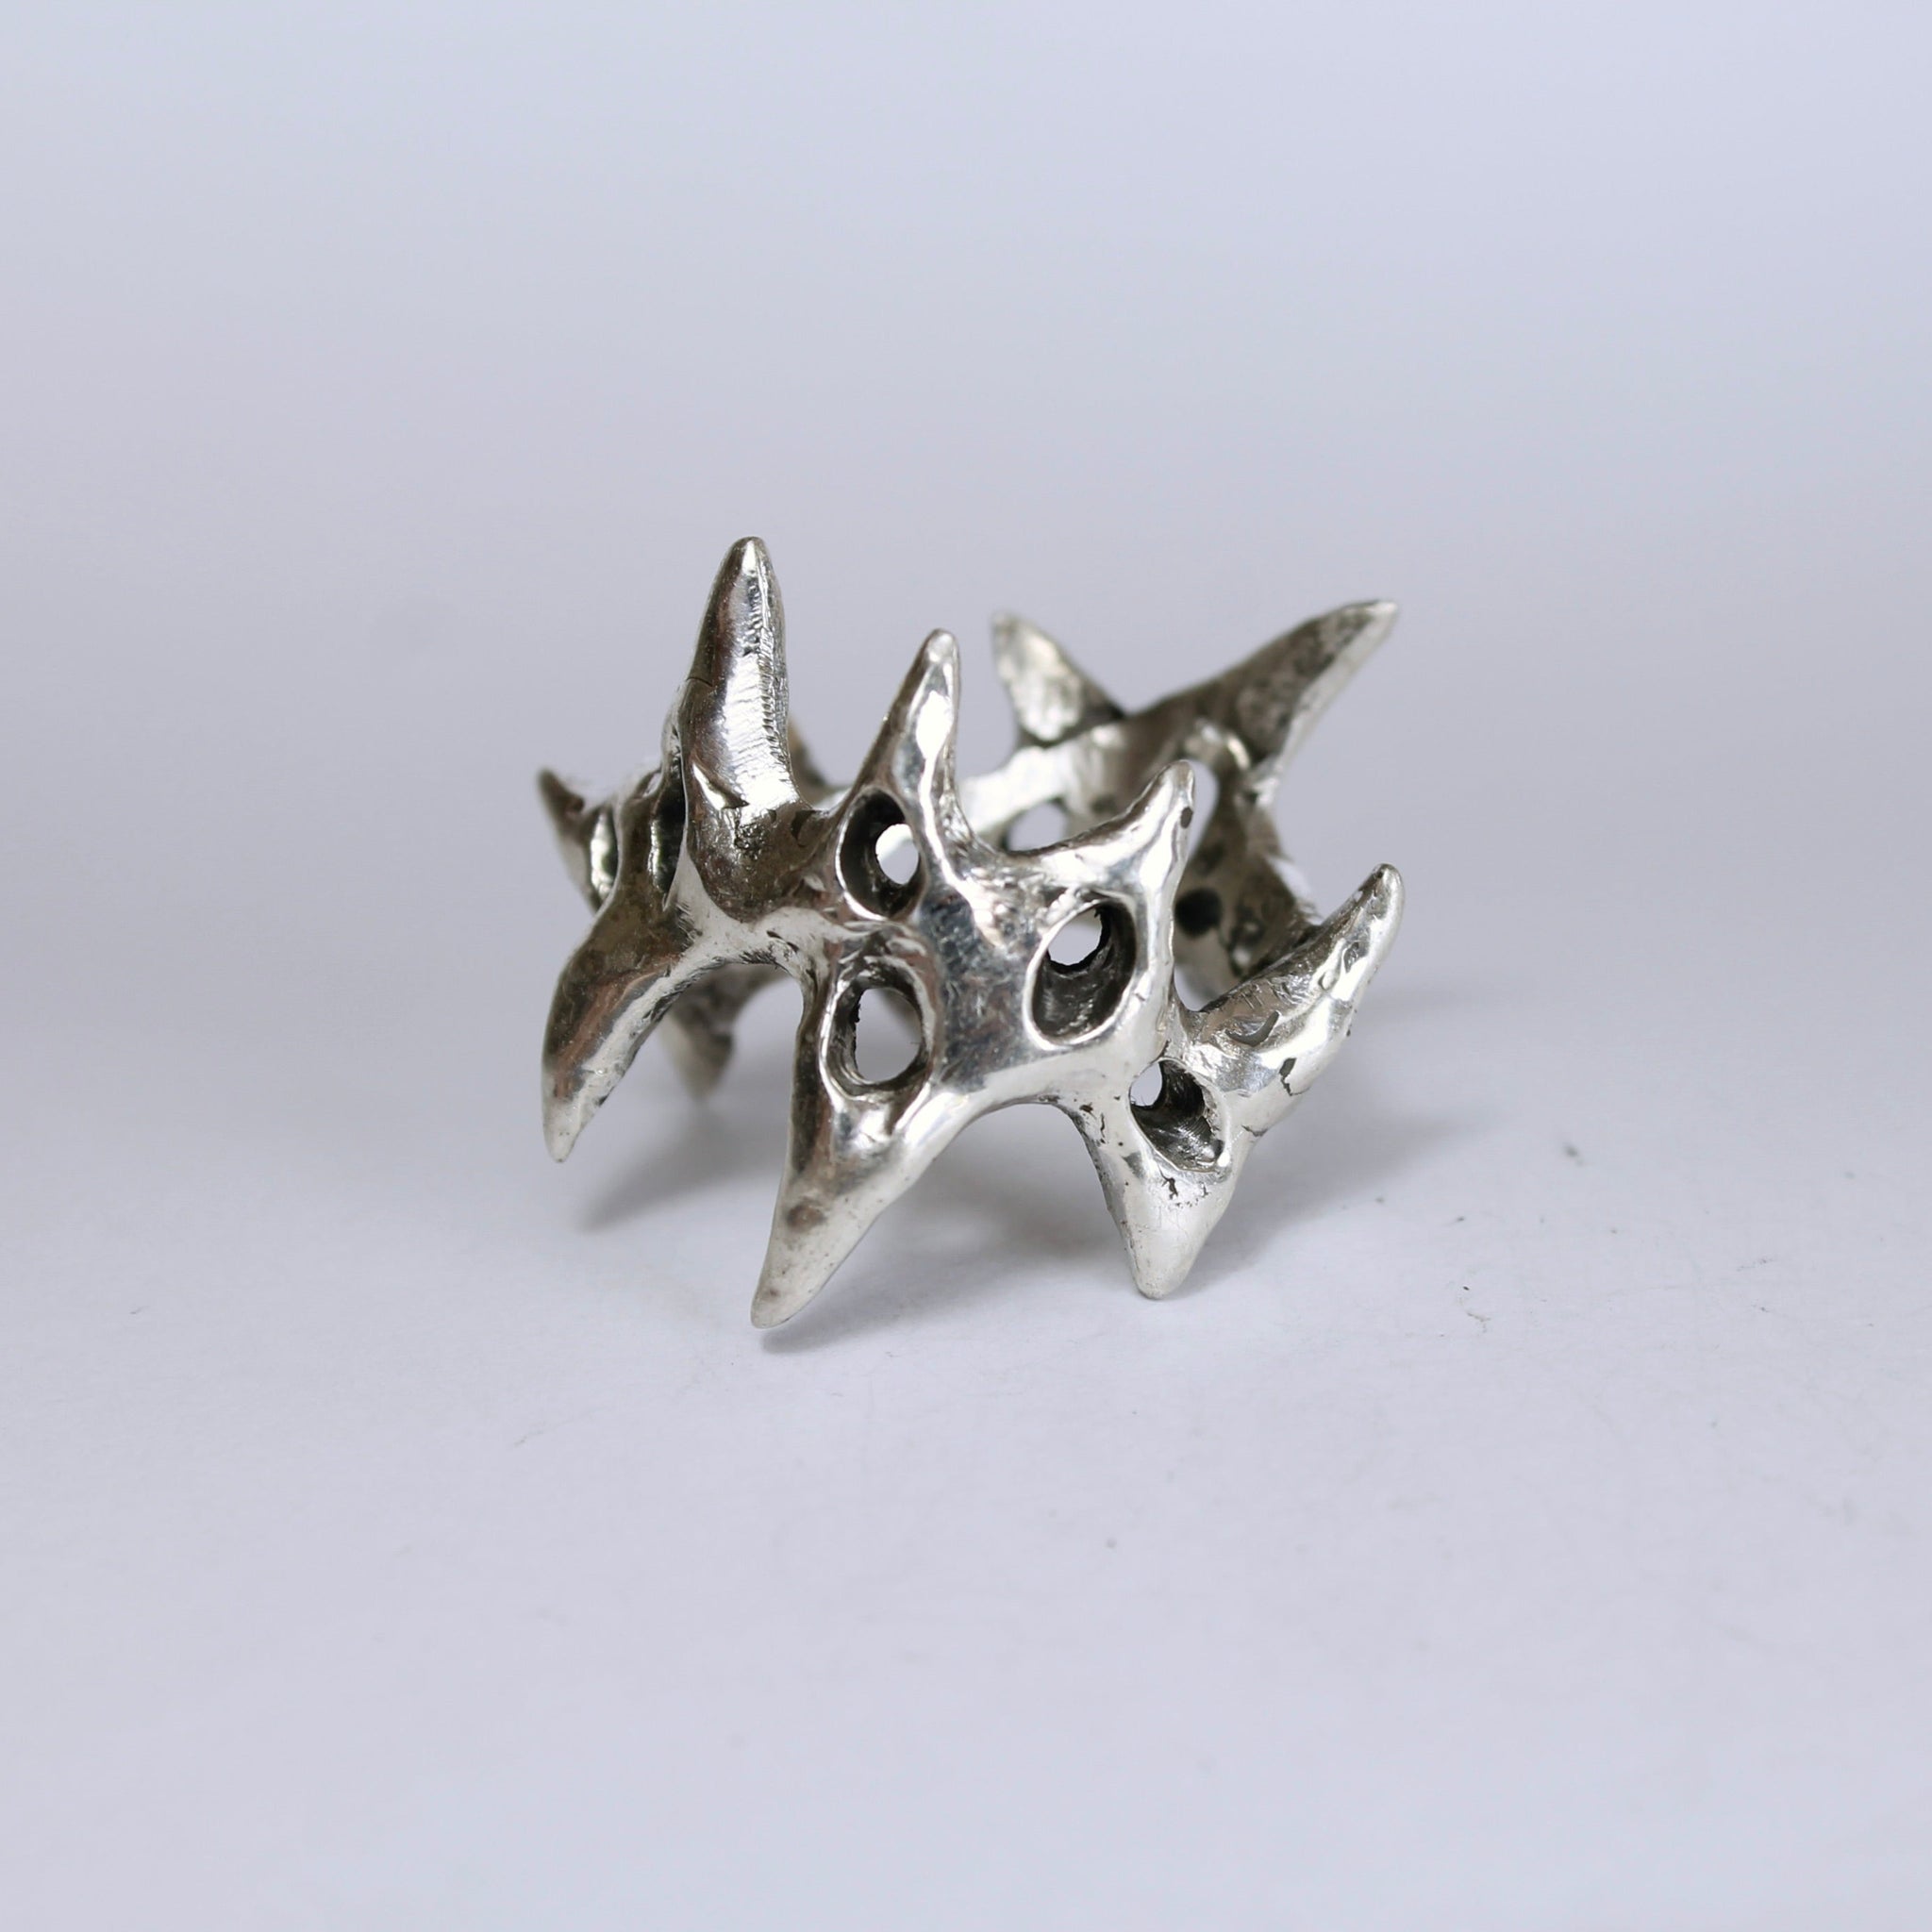 Spiny Substance Ring N°3